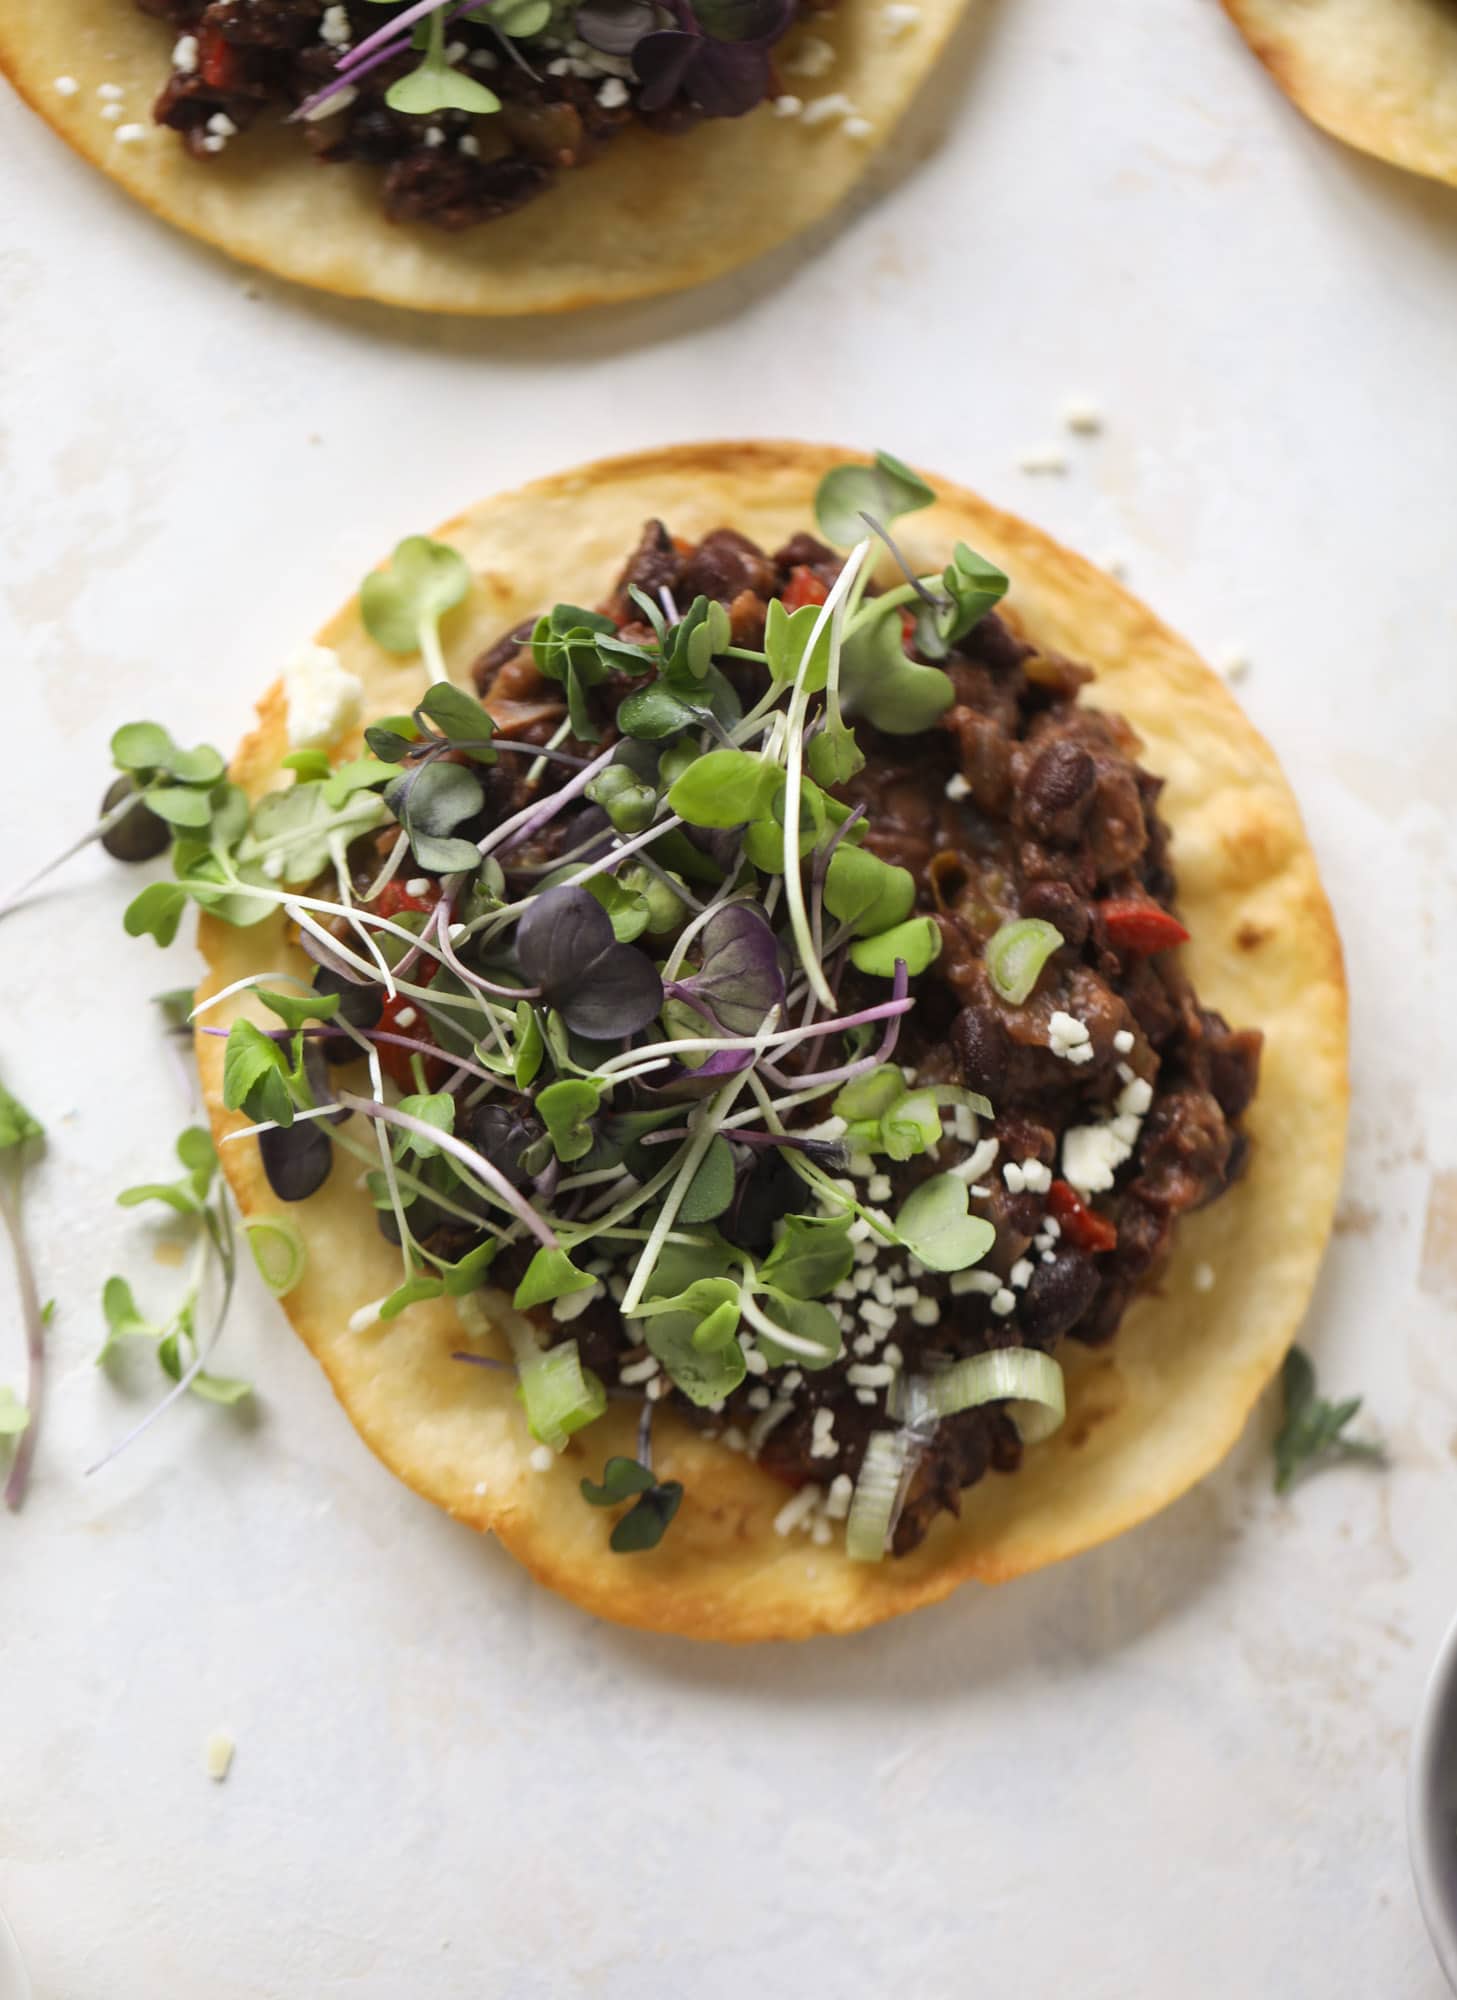 These saucy black bean tostadas are super flavorful and easy for a weeknight meal. Crunchy tortillas topped with beans and tons of veggies. Delish!